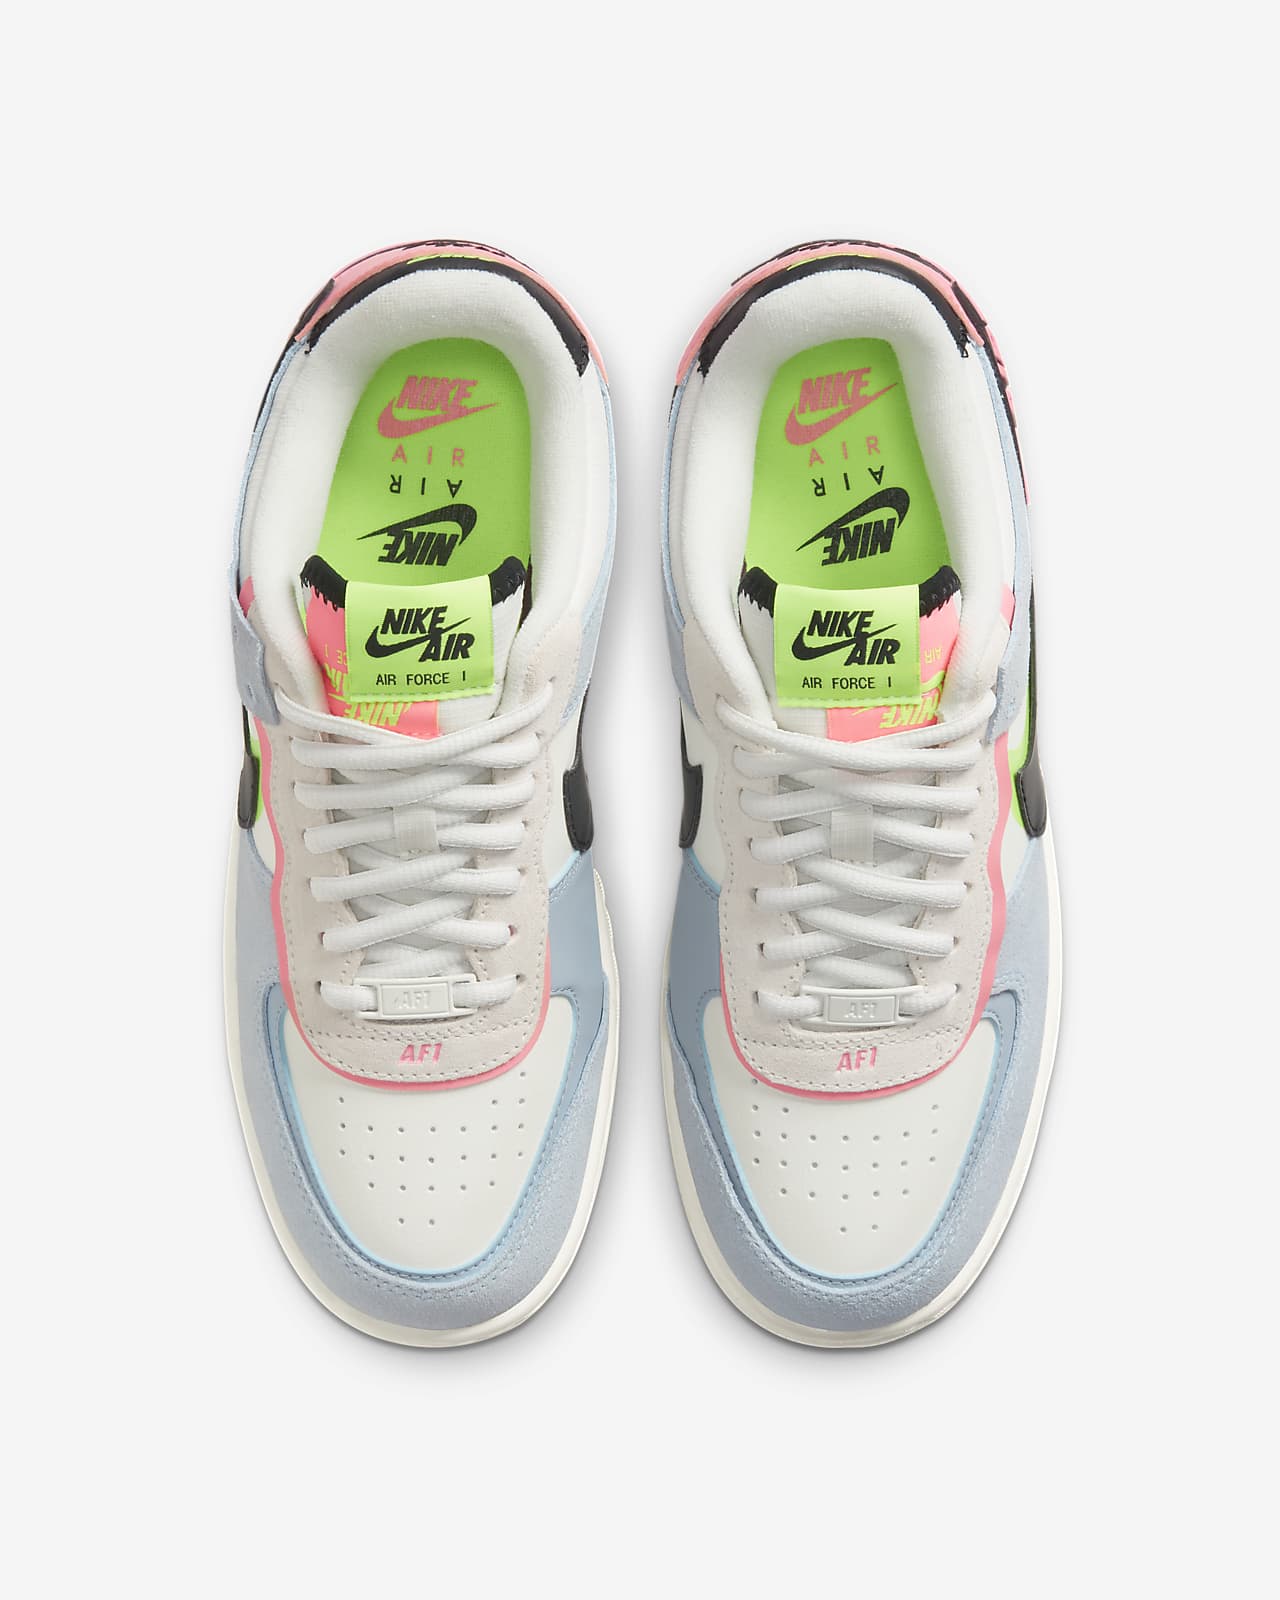 nike white sneakers air force women's